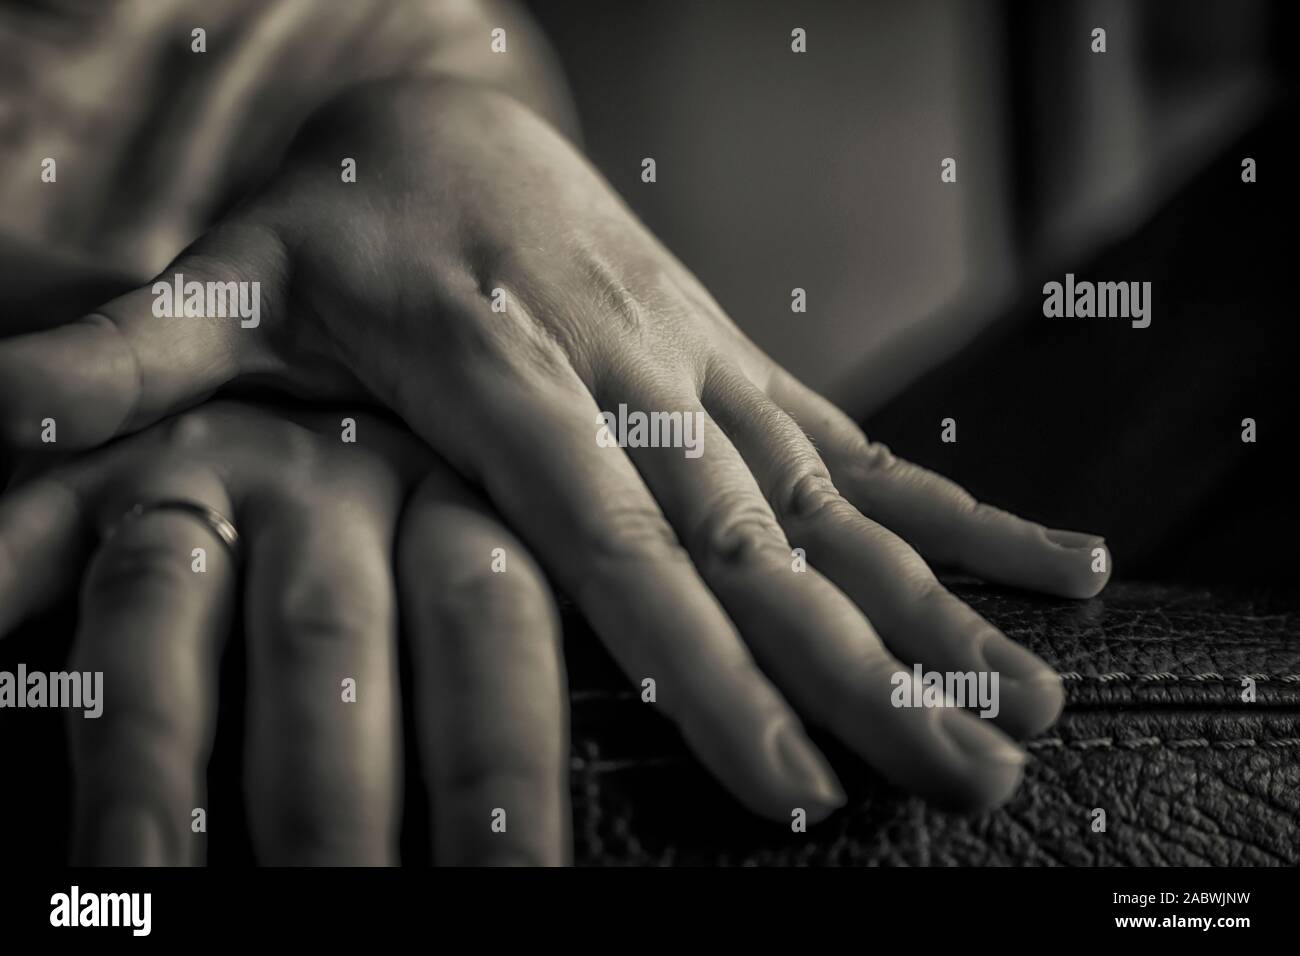 A close up of a woman's hands one over another in black and white Stock Photo